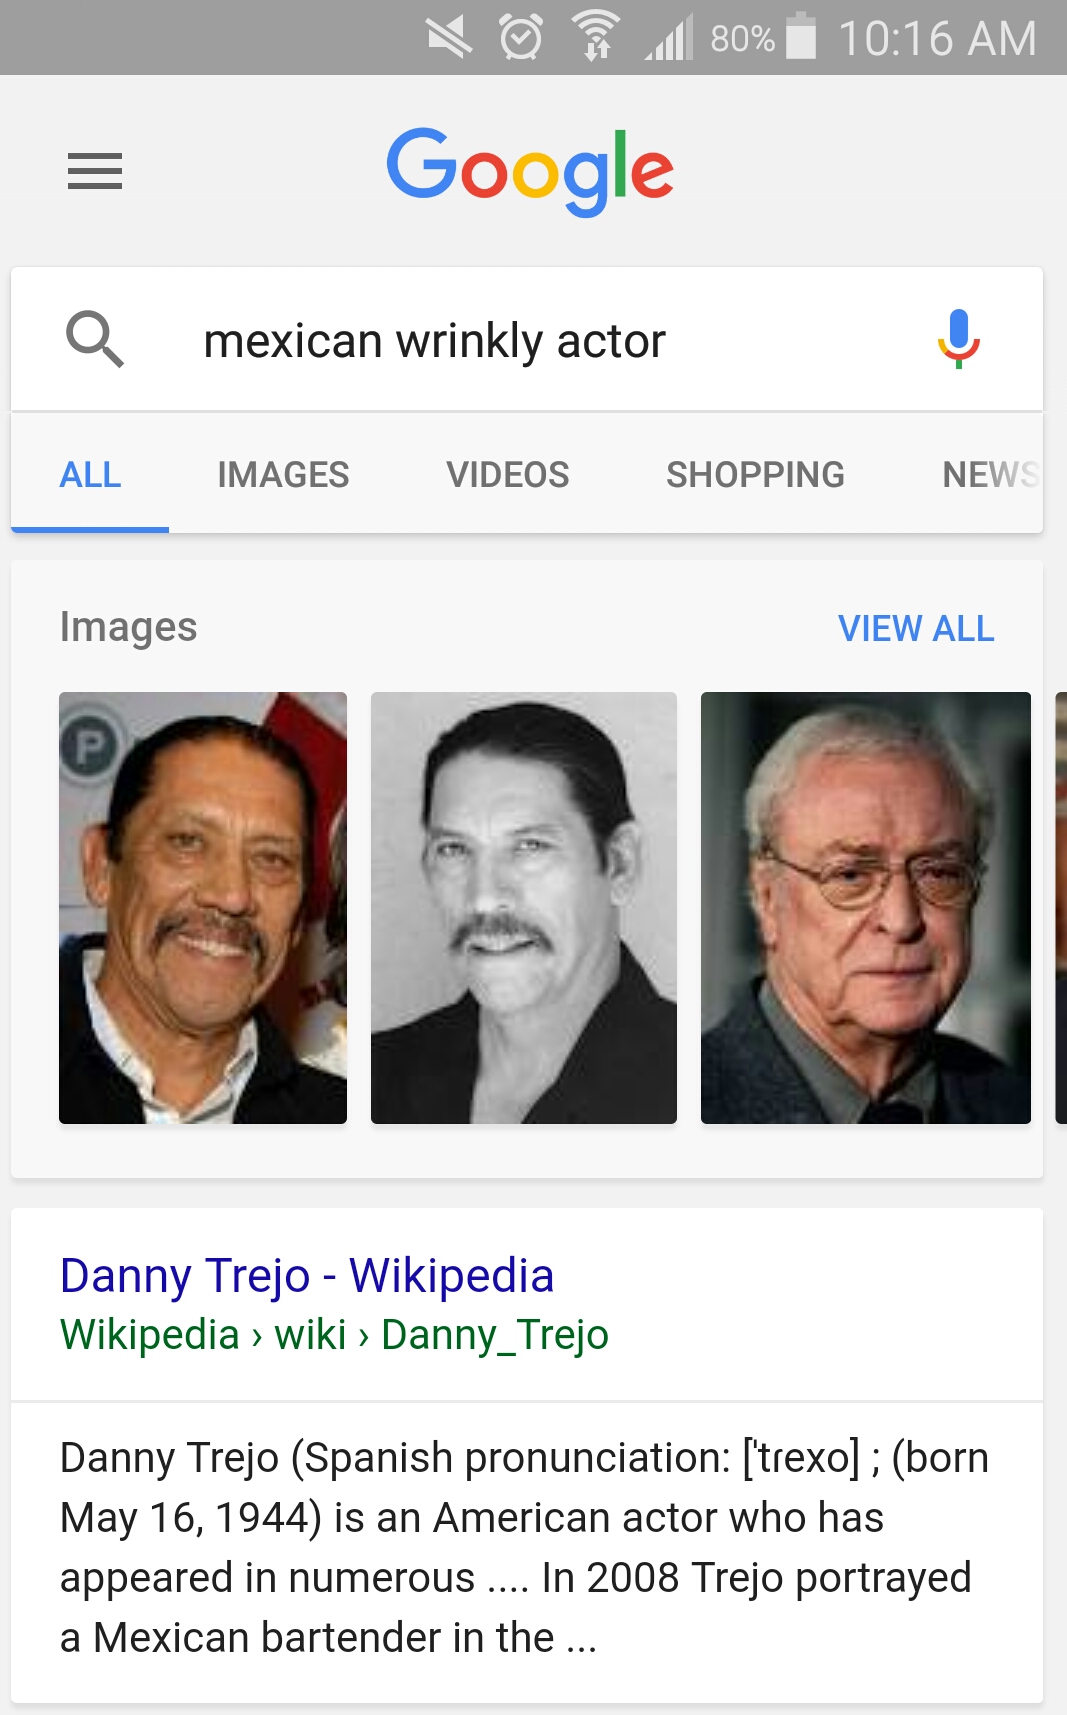 media - 0 .80% i Google a mexican wrinkly actor All Images Videos Shopping News Images View All Danny Trejo Wikipedia Wikipedia > wiki > Danny Trejo Danny Trejo Spanish pronunciation trexo born is an American actor who has appeared in numerous.... In 2008